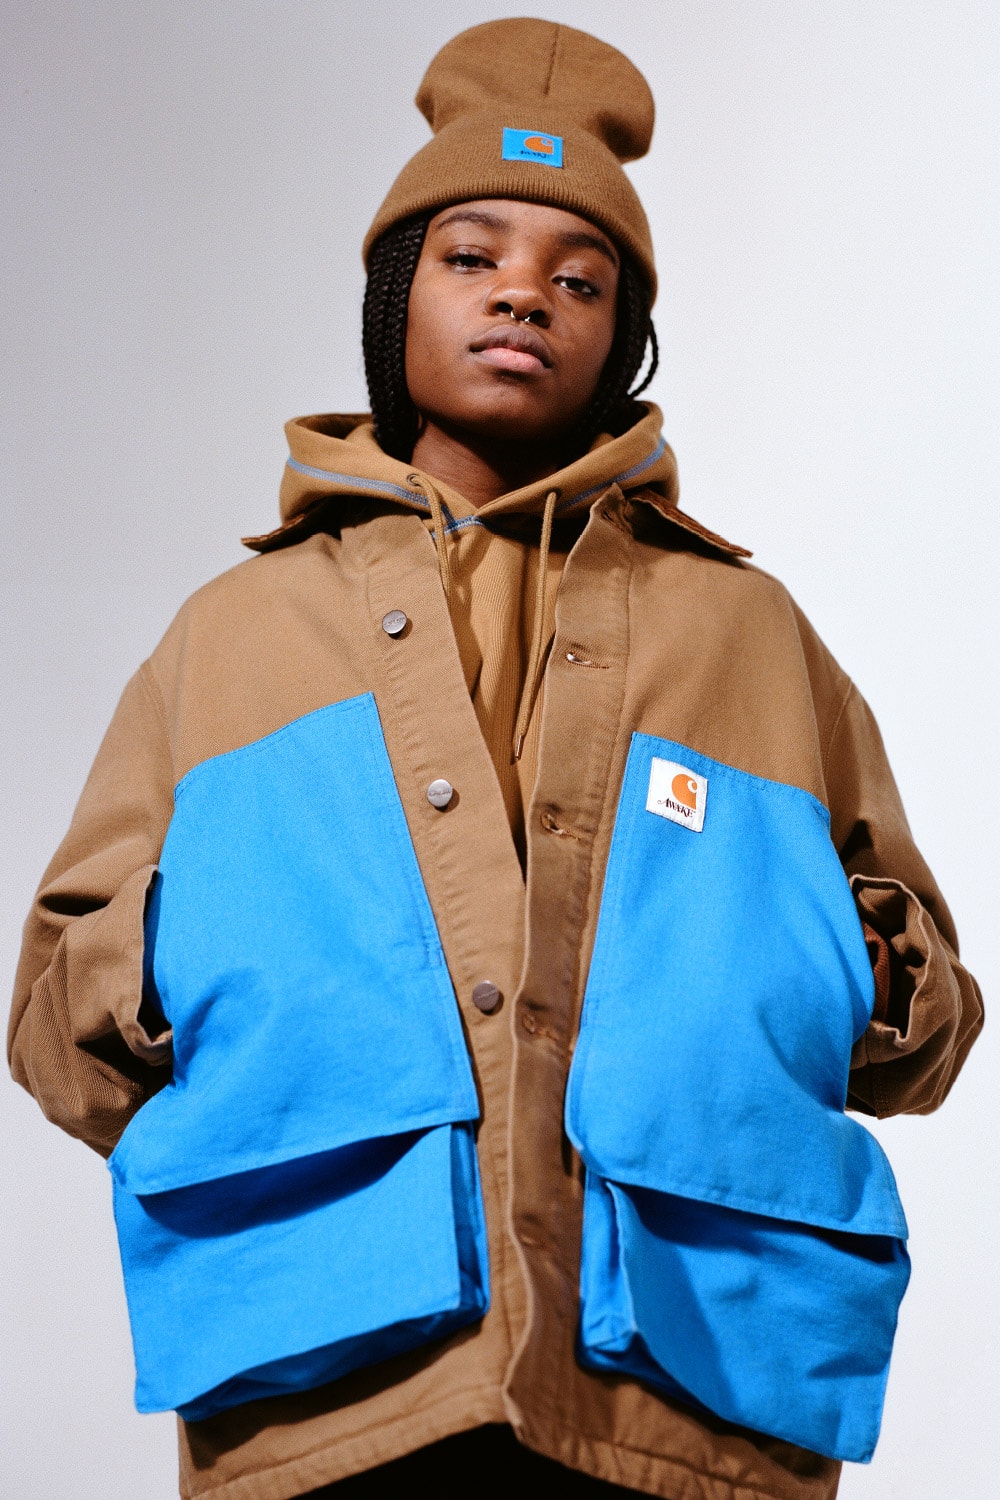 Awake NY x Carhartt WIP Capsule Collection release drop info vintage hunting outerwear outdoors workwear michigan coat american script jersey Watch Hat beanie in Black, Hamilton Brown, and Awake NY Bright Blue